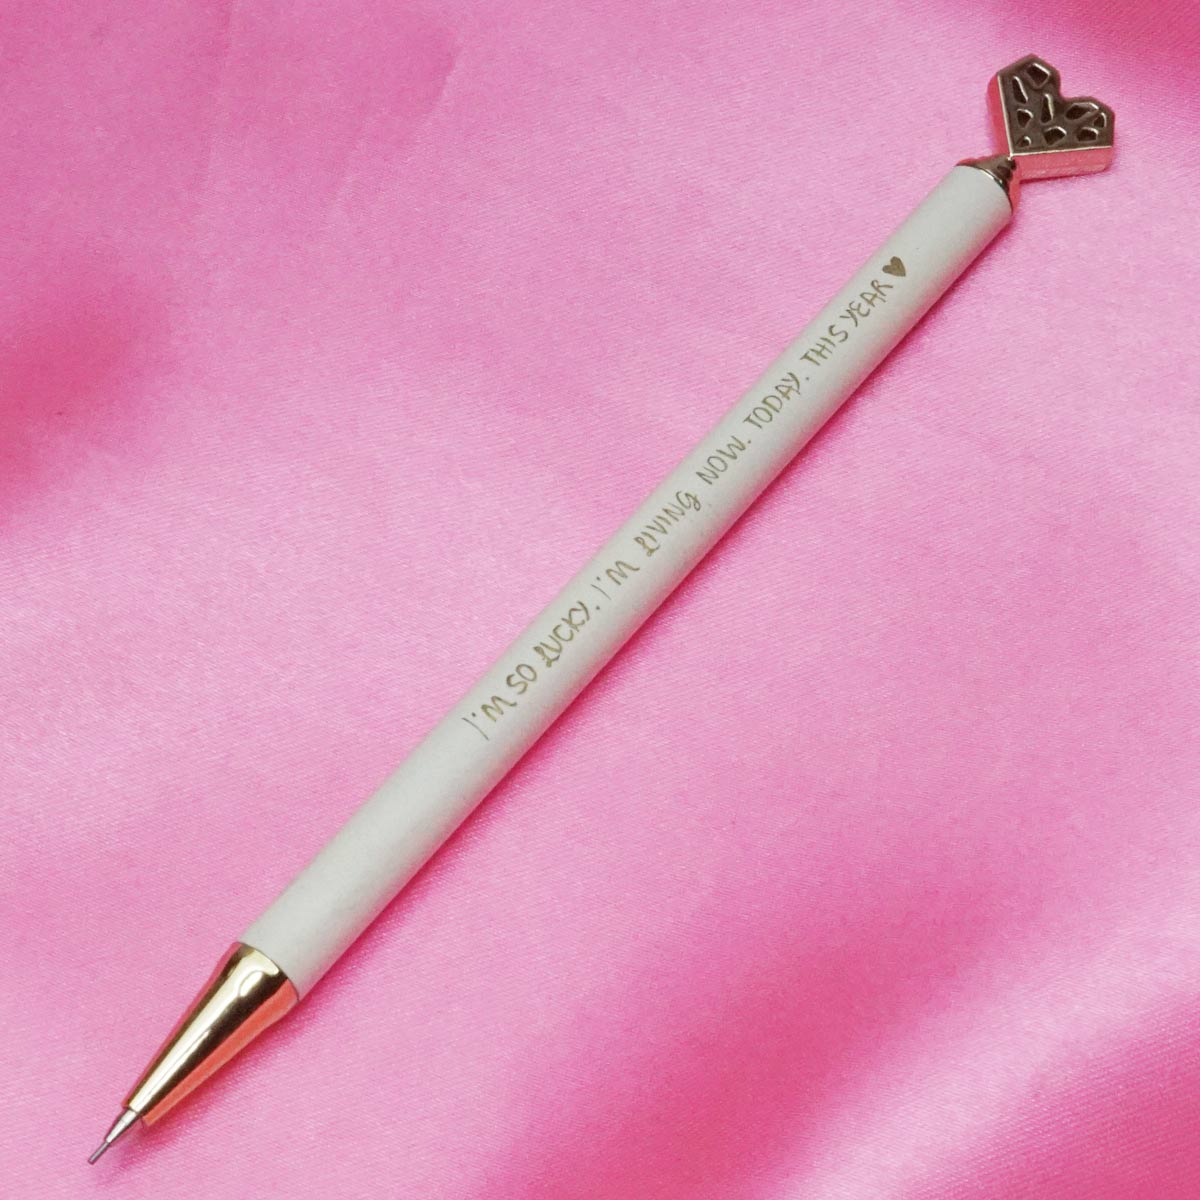 Oufeiya 5336 0.7mm Creamy White Color Body With Gold Heart Design Top Click Led Pencil SKU 21524